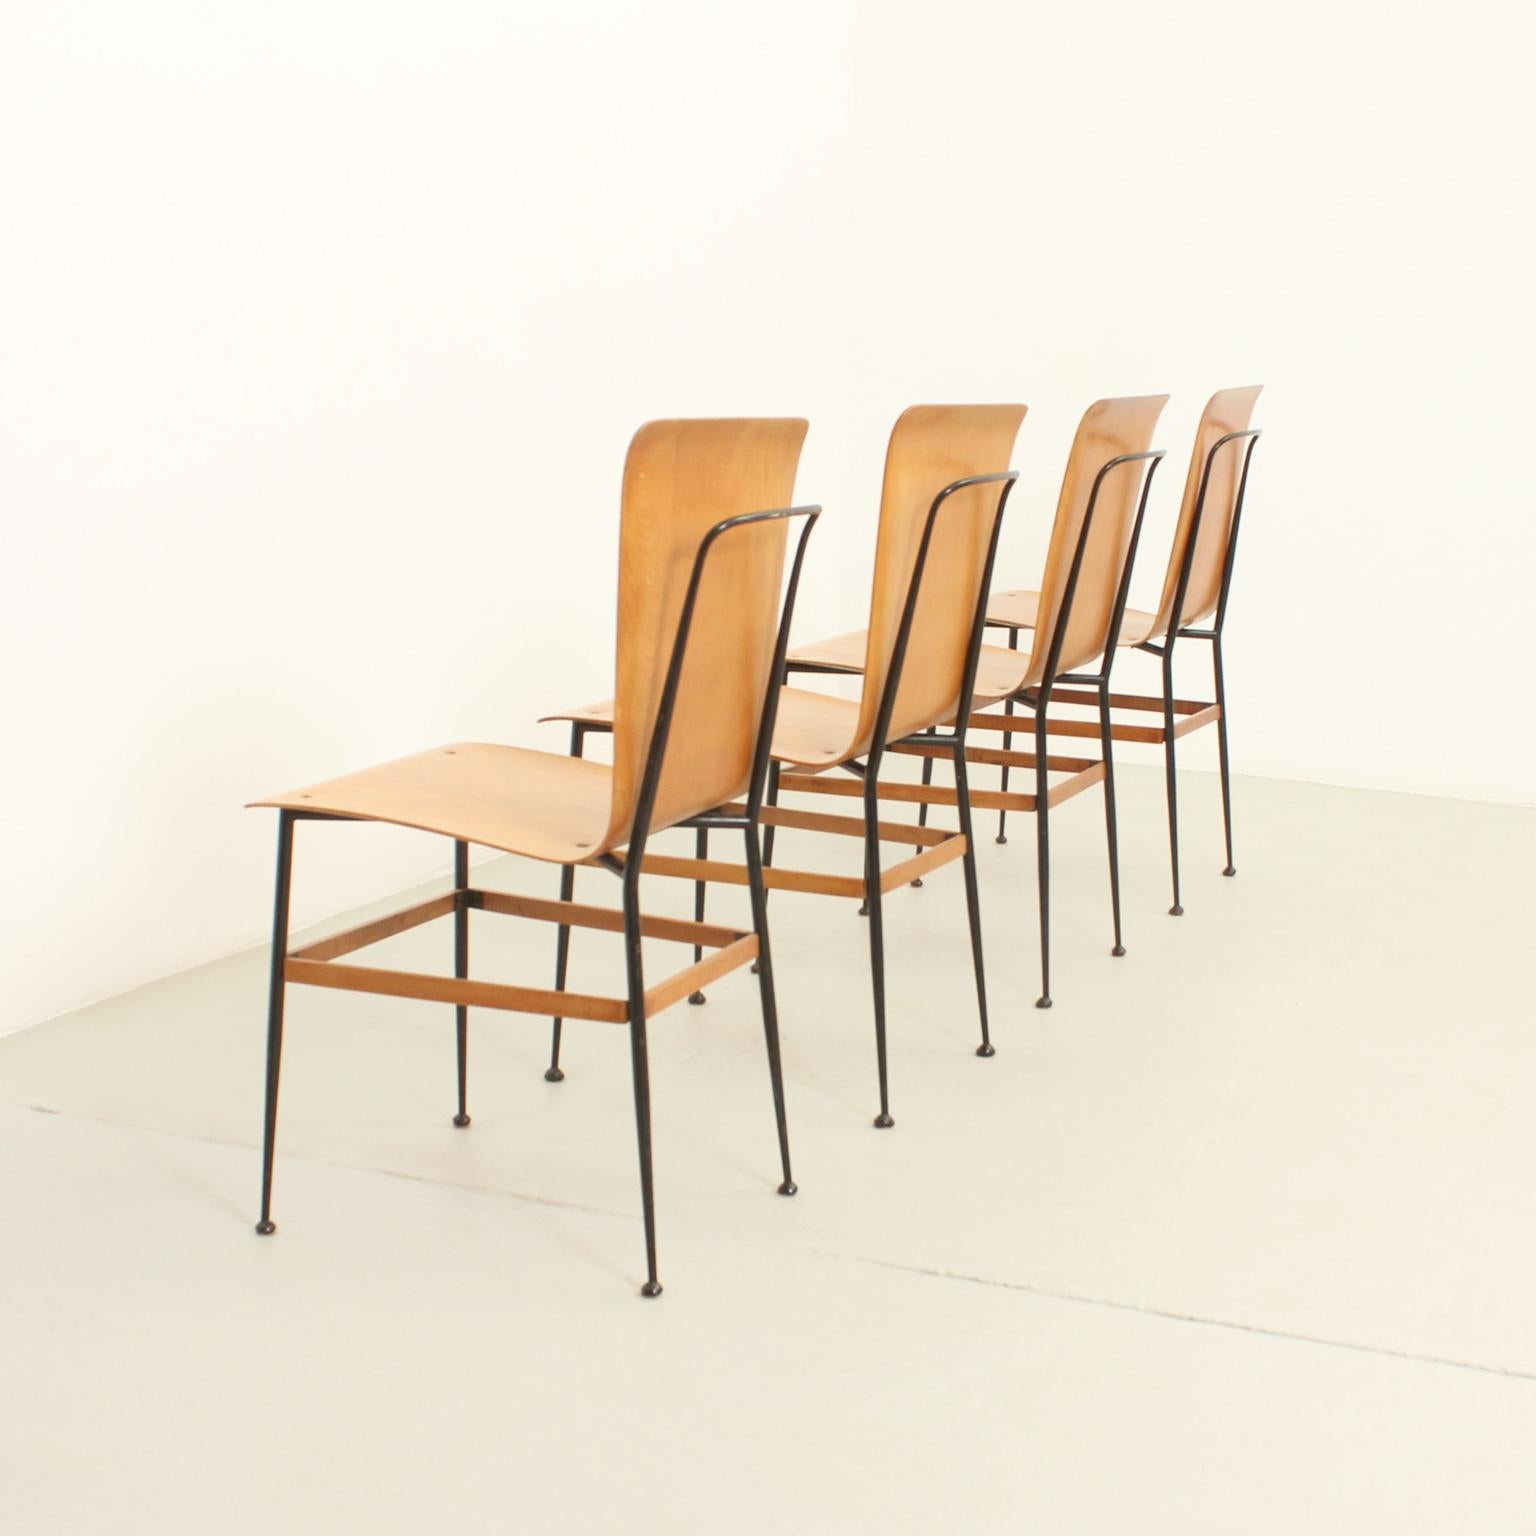 Plywood Dining Chairs by Carlo Ratti, Italy, 1950s For Sale 8